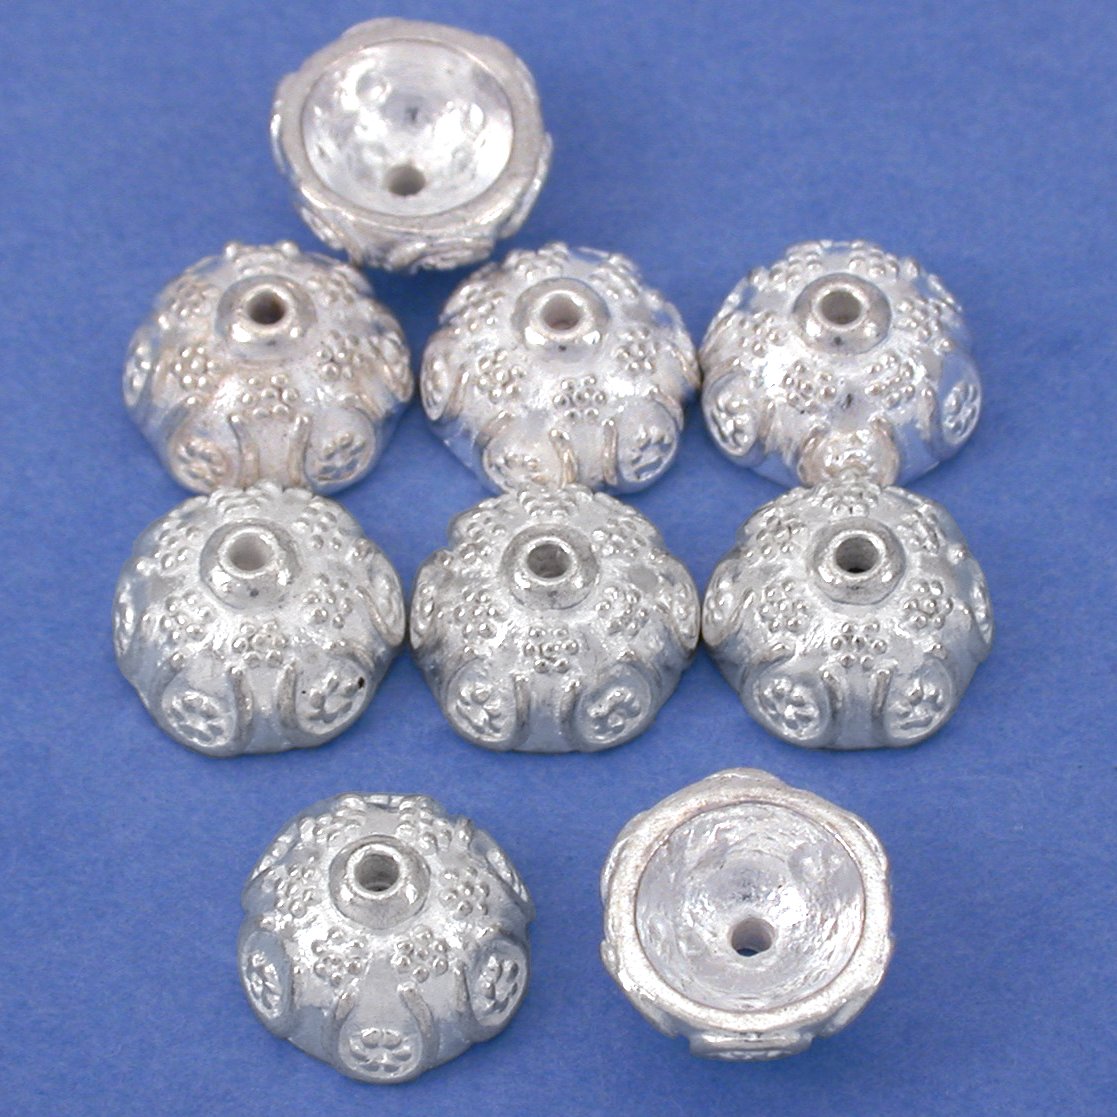 Flower Bead Caps Bali Silver Plated 11mm 16 Grams 8Pcs Approx.